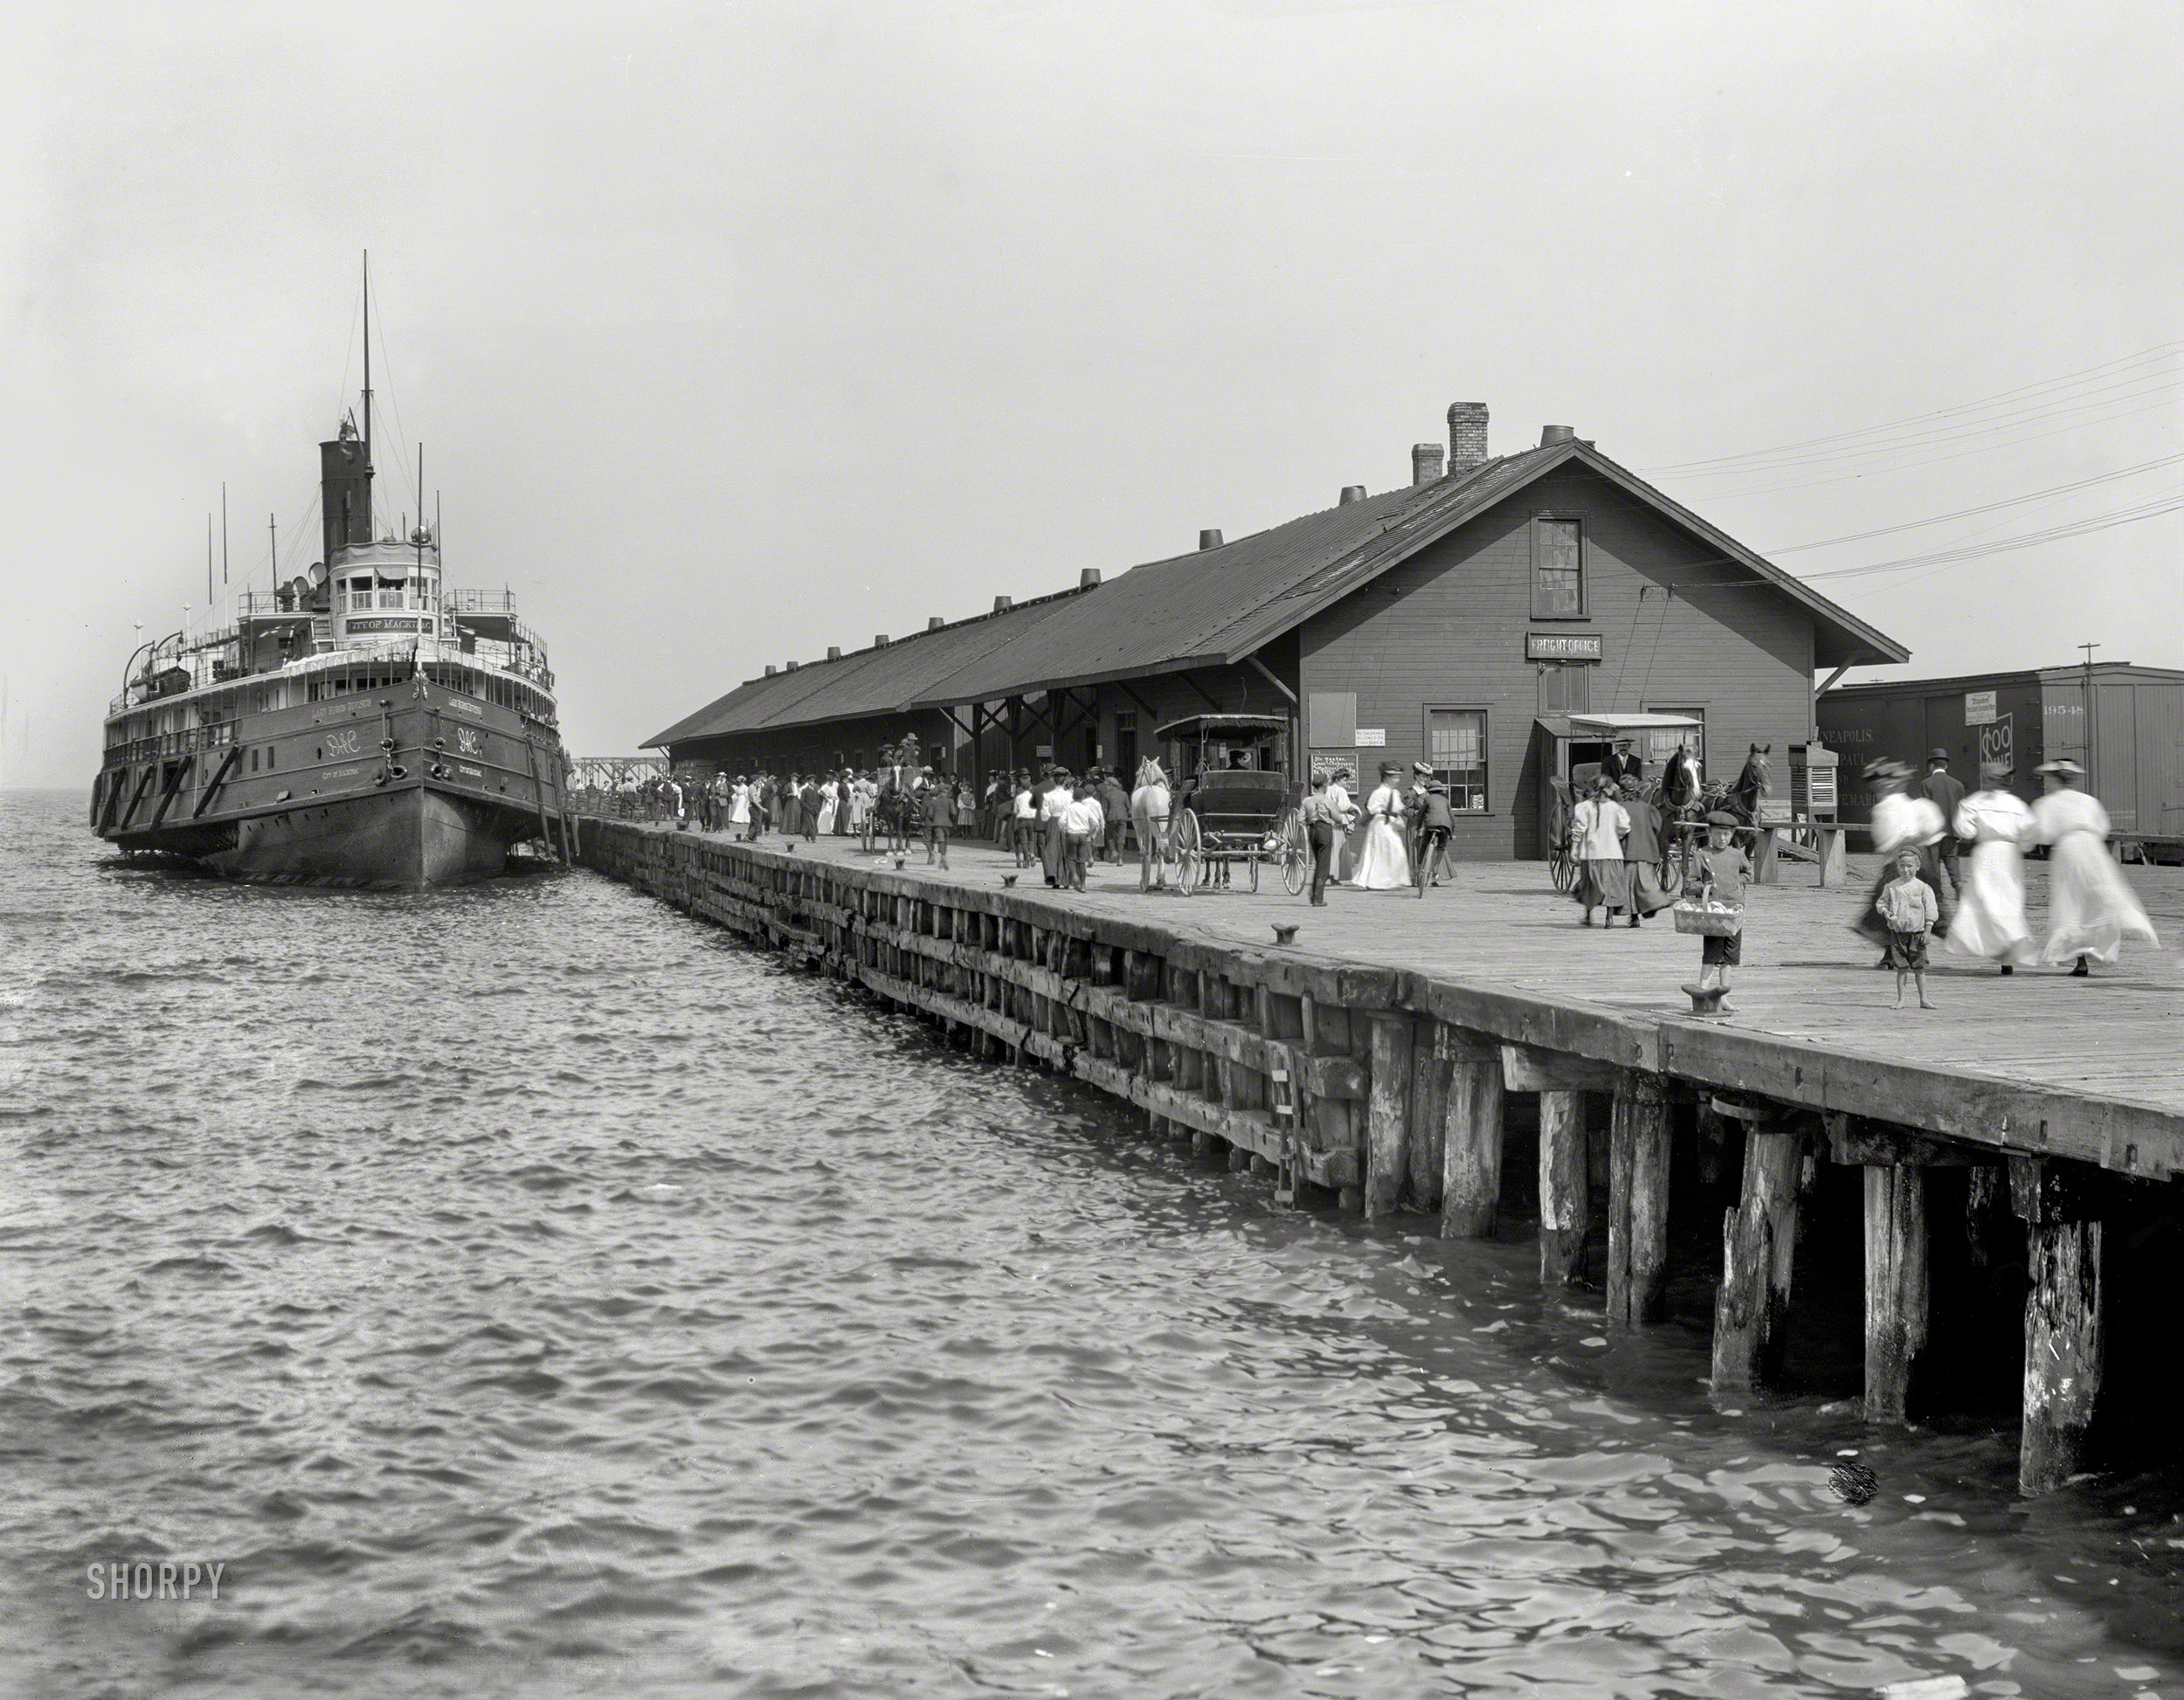 Circa 1905. "D.& C. steamer at dock, St. Ignace, Michigan." The Detroit & Cleveland Navigation Company's City of Mackinac. 8x10 inch dry plate glass negative. View full size.